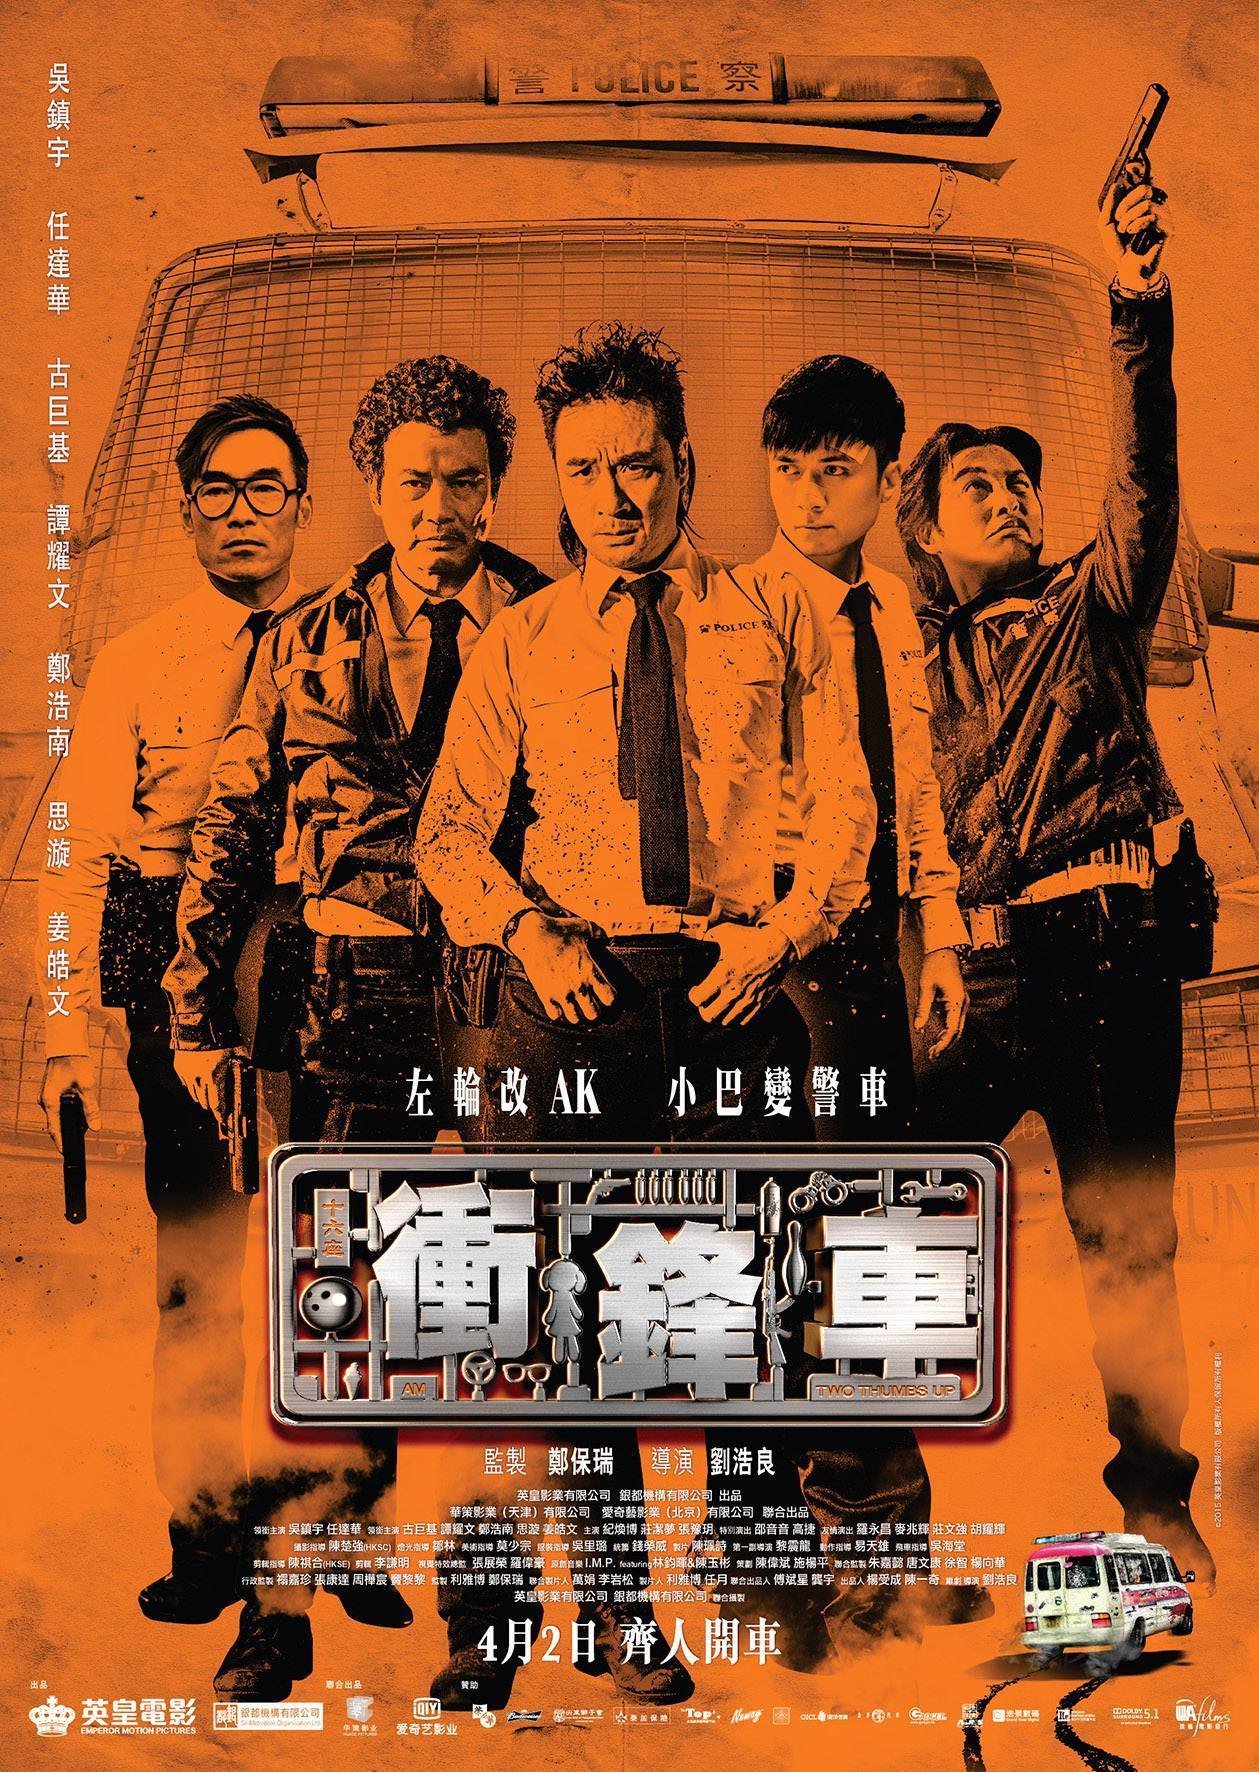 Poster of the movie Chung fung che